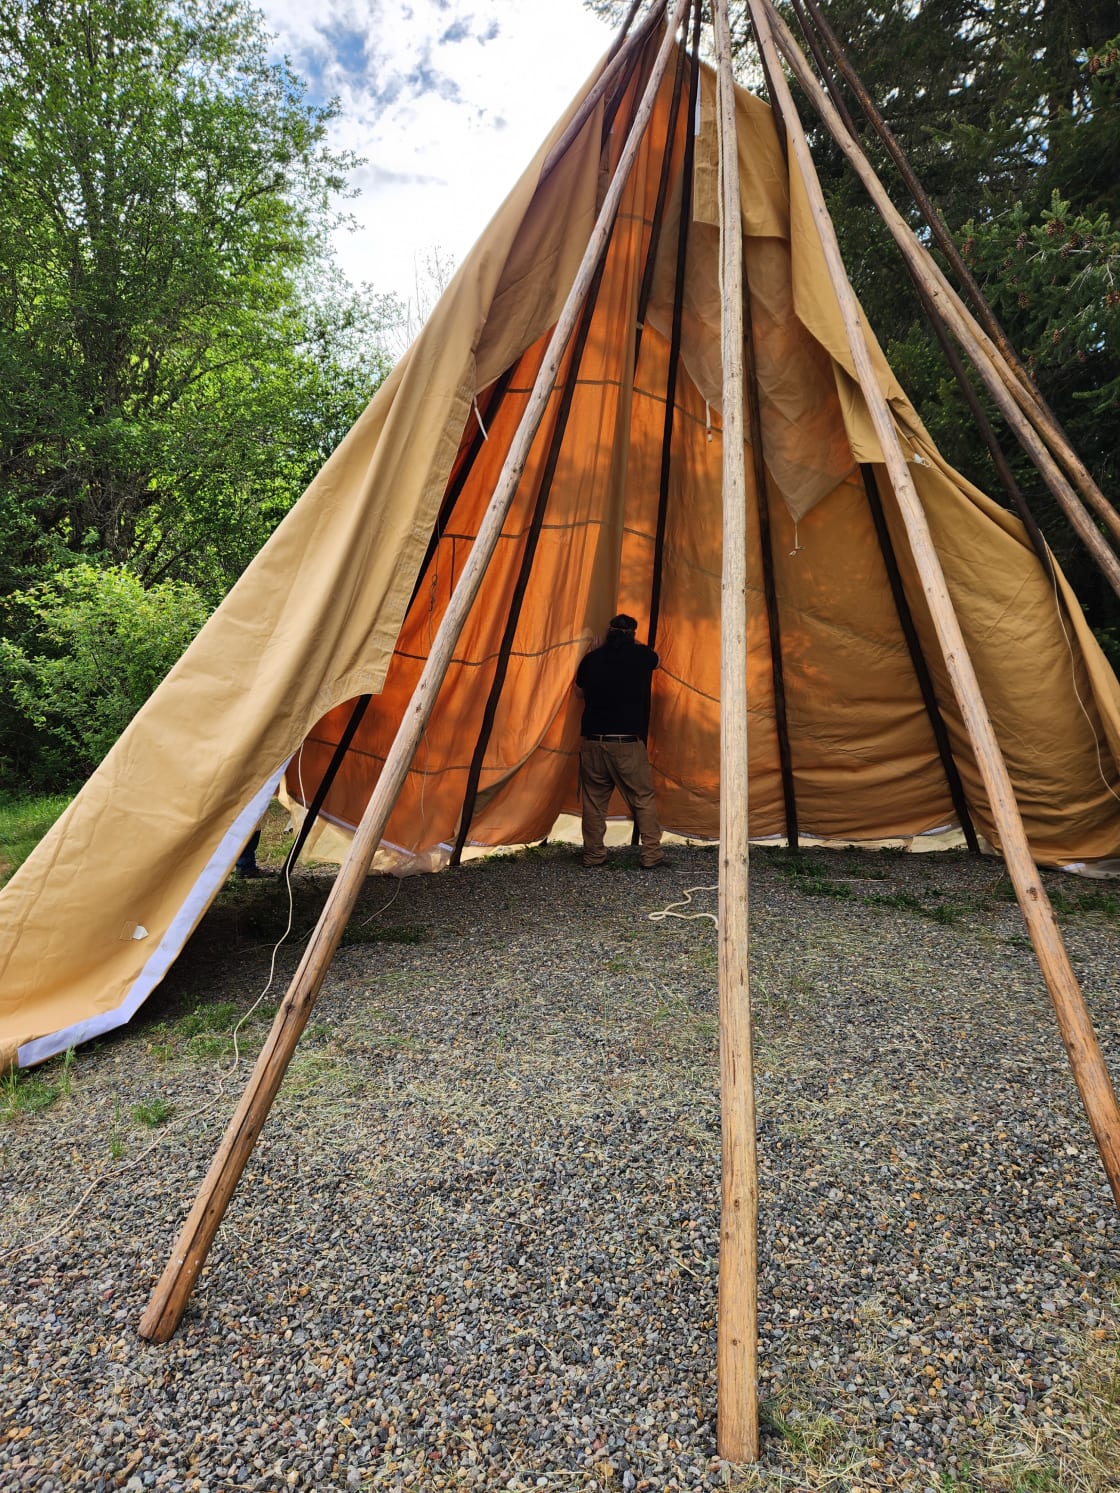 Soon the 20' Tipi will be available to Campers to rent